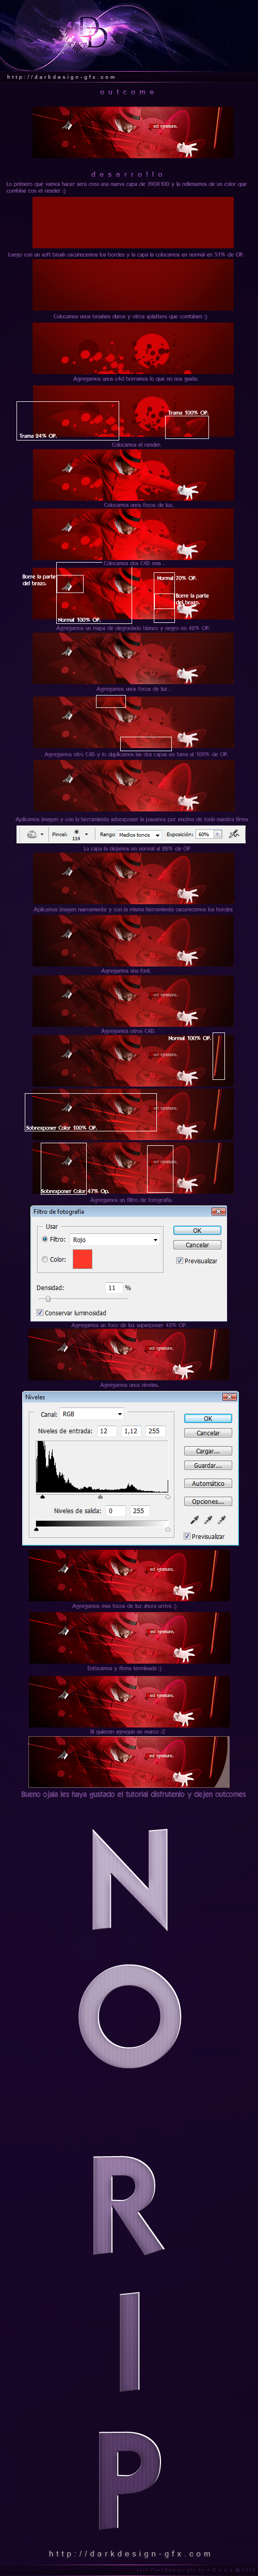 Red_Signature_tutorial_by_relotidean.jpg